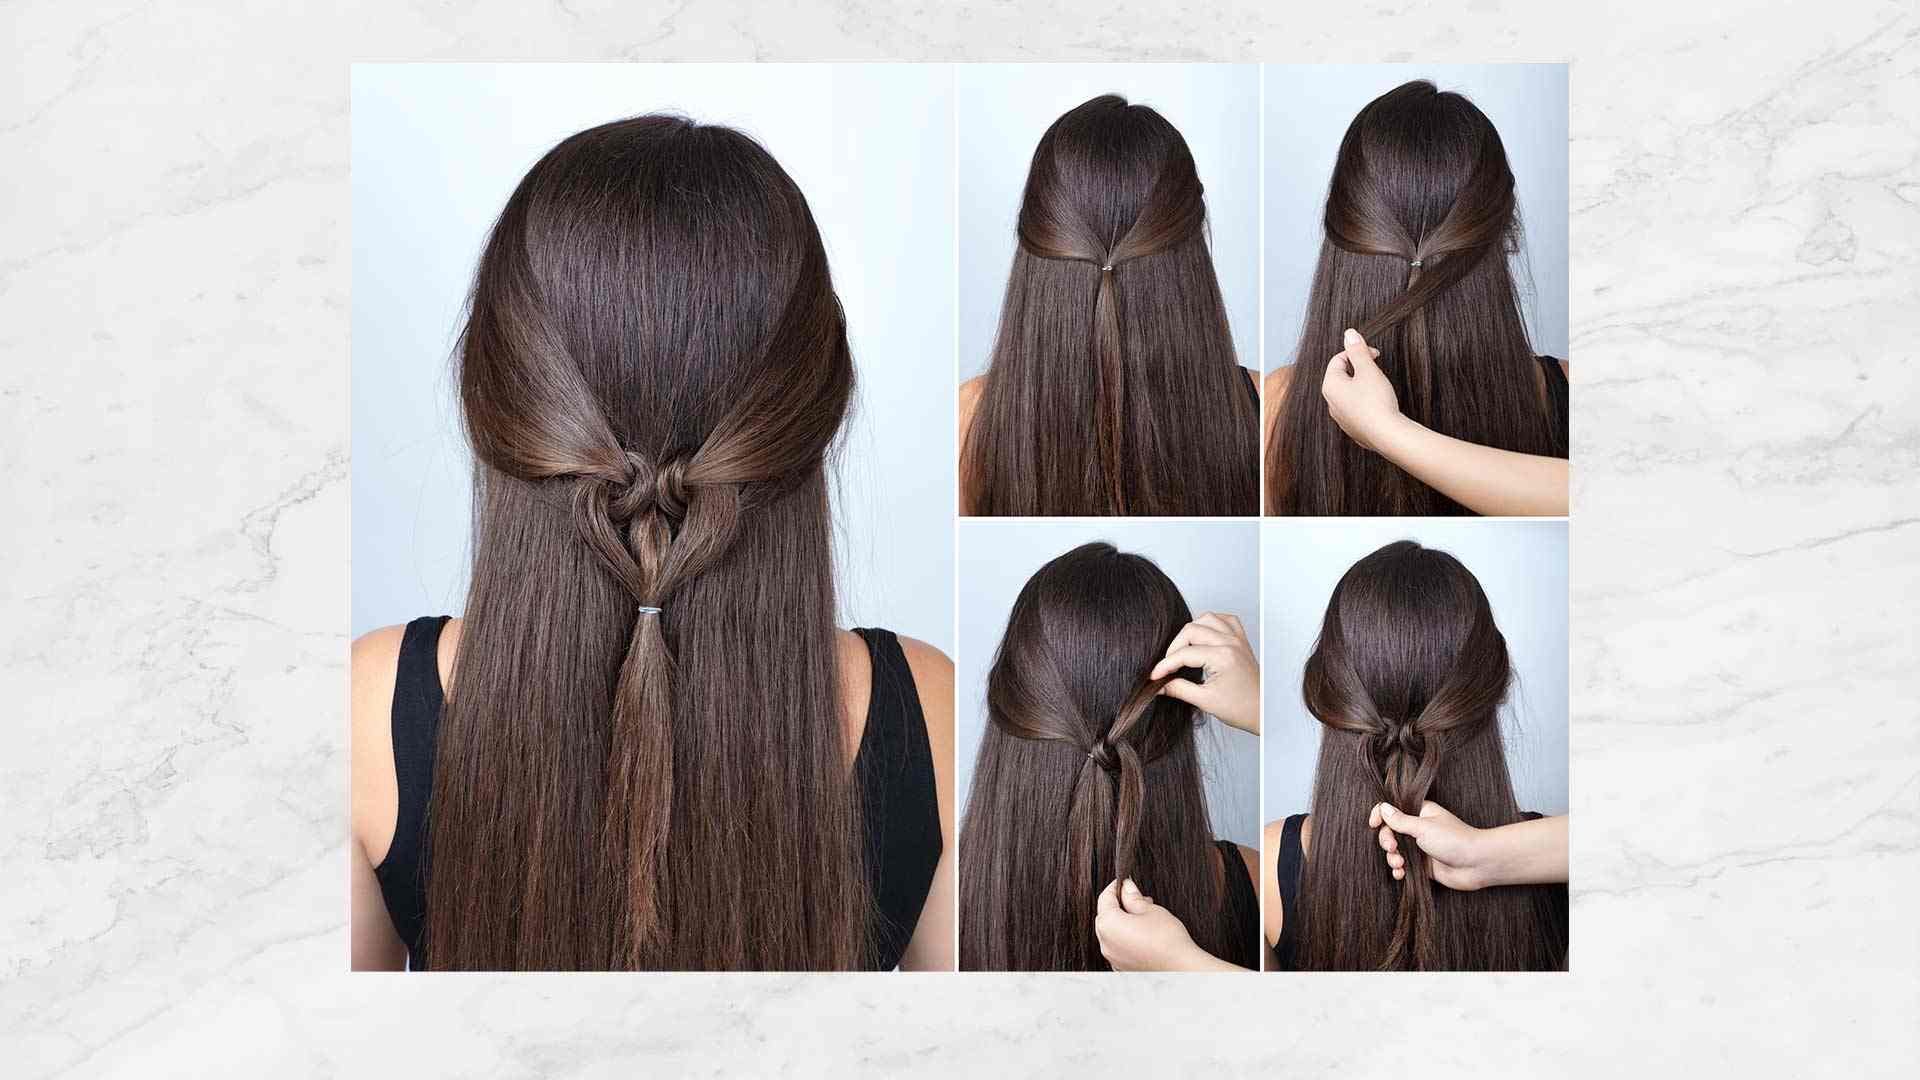 15 Easy Open Hairstyles Suited for Long Hair - K4 Fashion